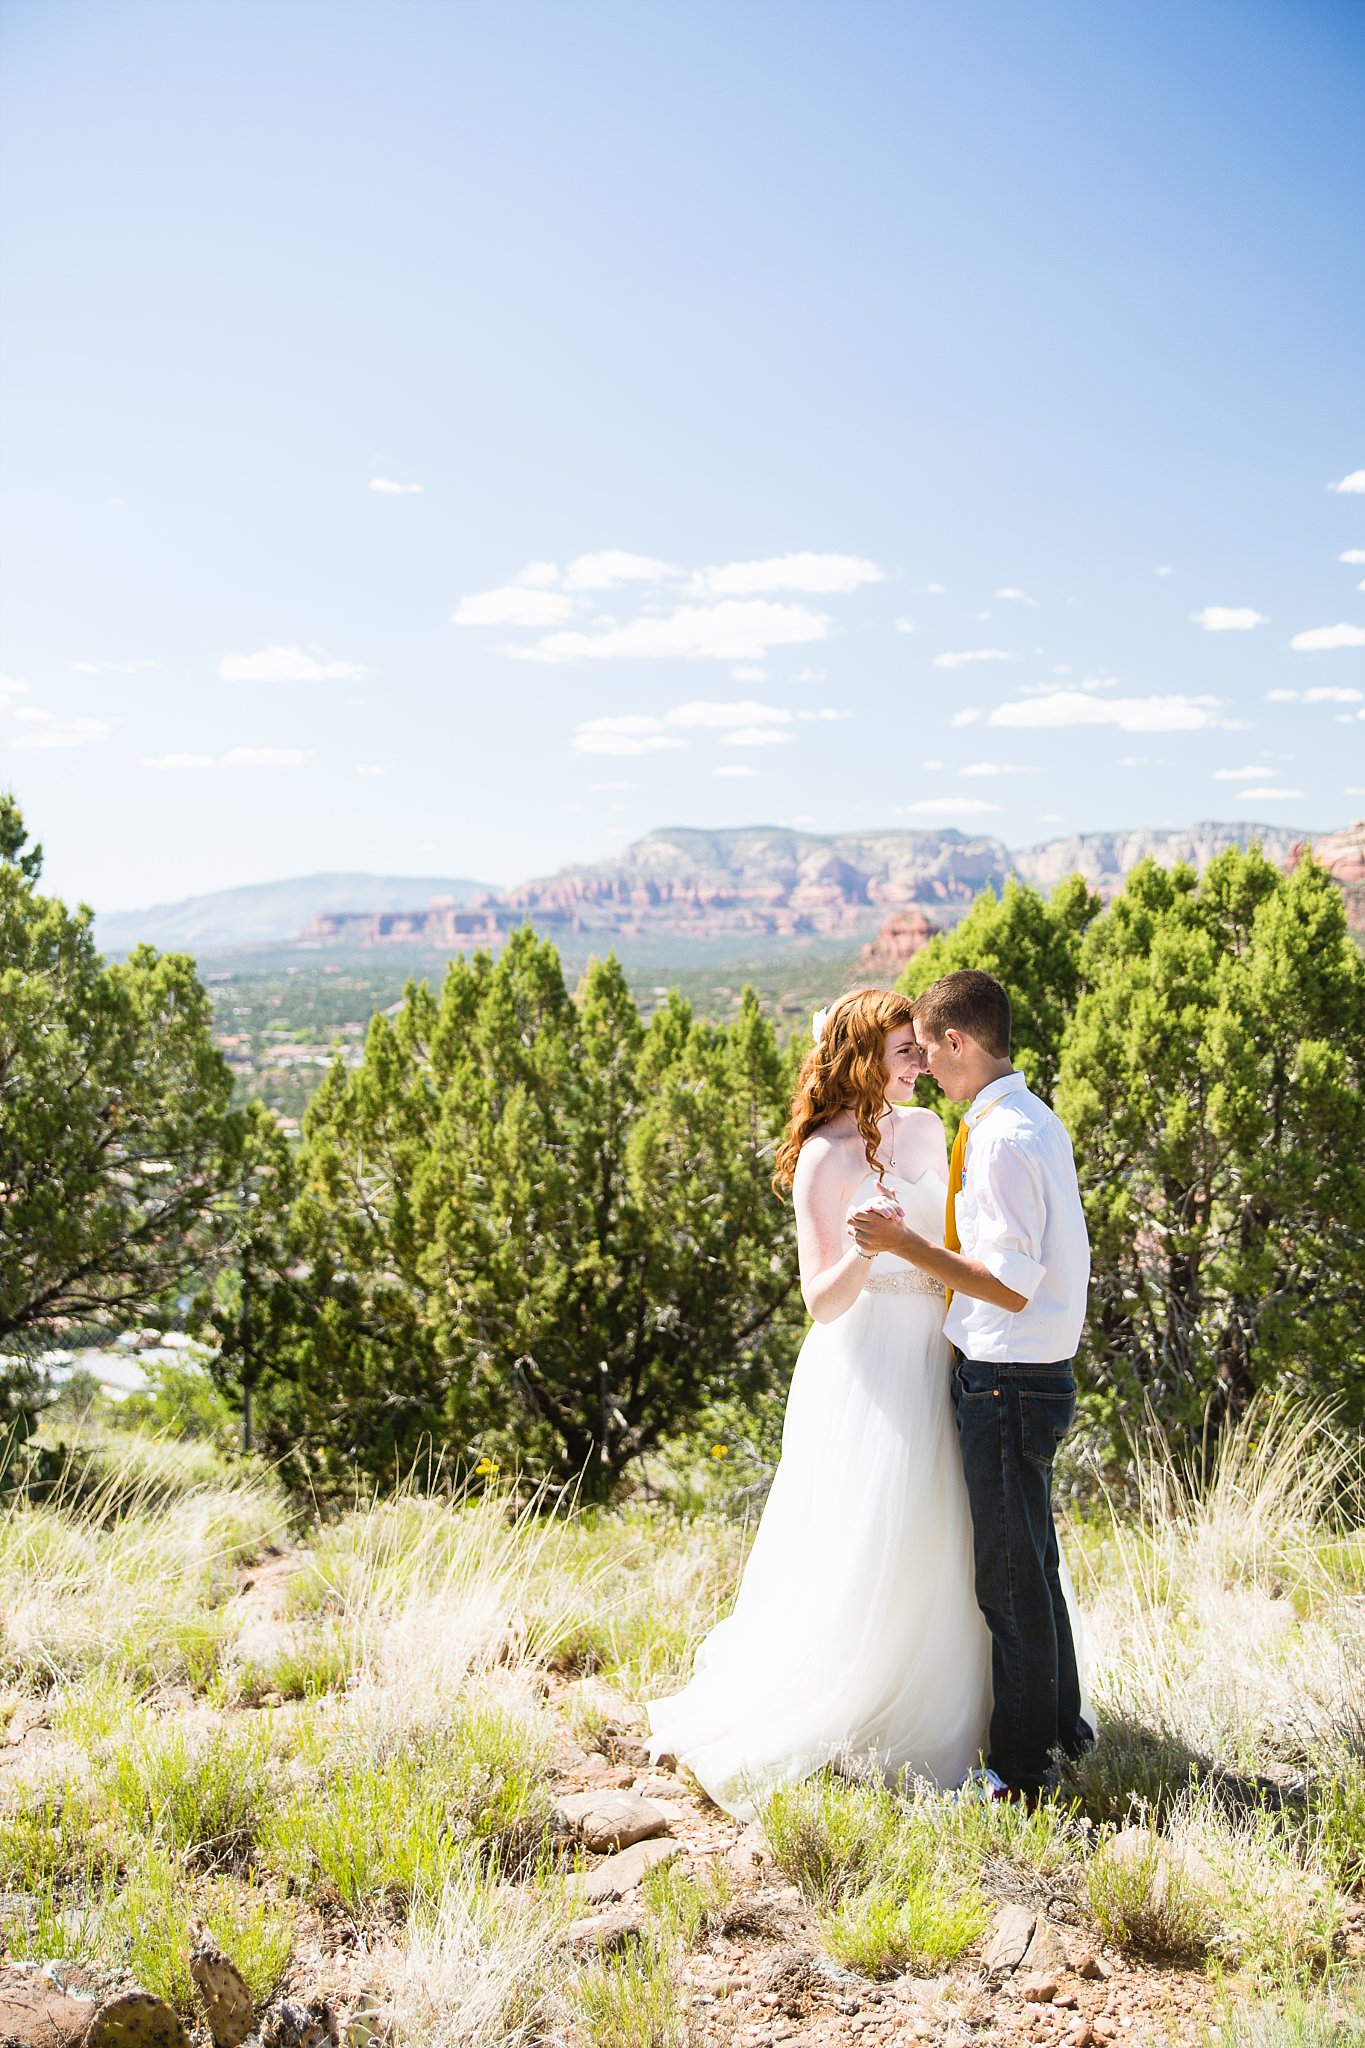 Bride and groom share an intimate moment during their Sky Ranch Lodge wedding by Sedona engagement photographer PMA Photography.